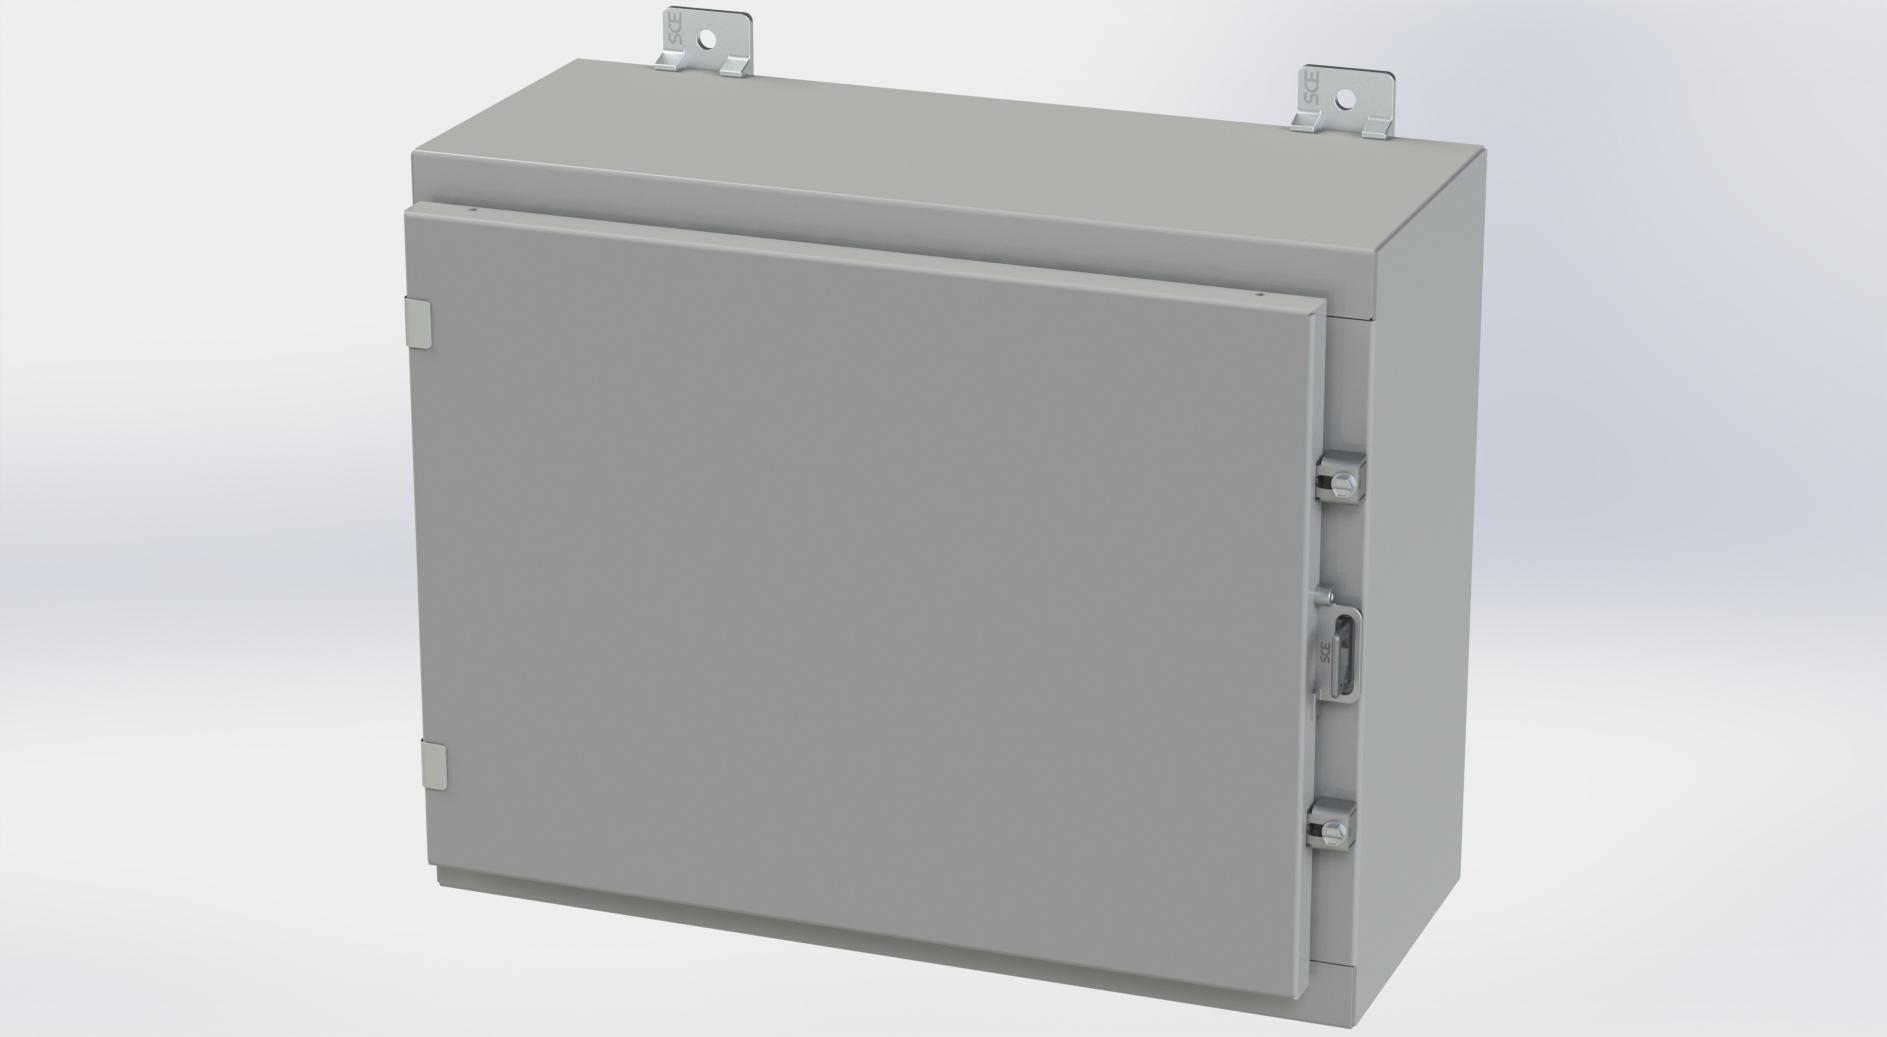 Saginaw Control SCE-16H2008LP Nema 4 LP Enclosure, Height:16.00", Width:20.00", Depth:8.00", ANSI-61 gray powder coating inside and out. Optional panels are powder coated white.